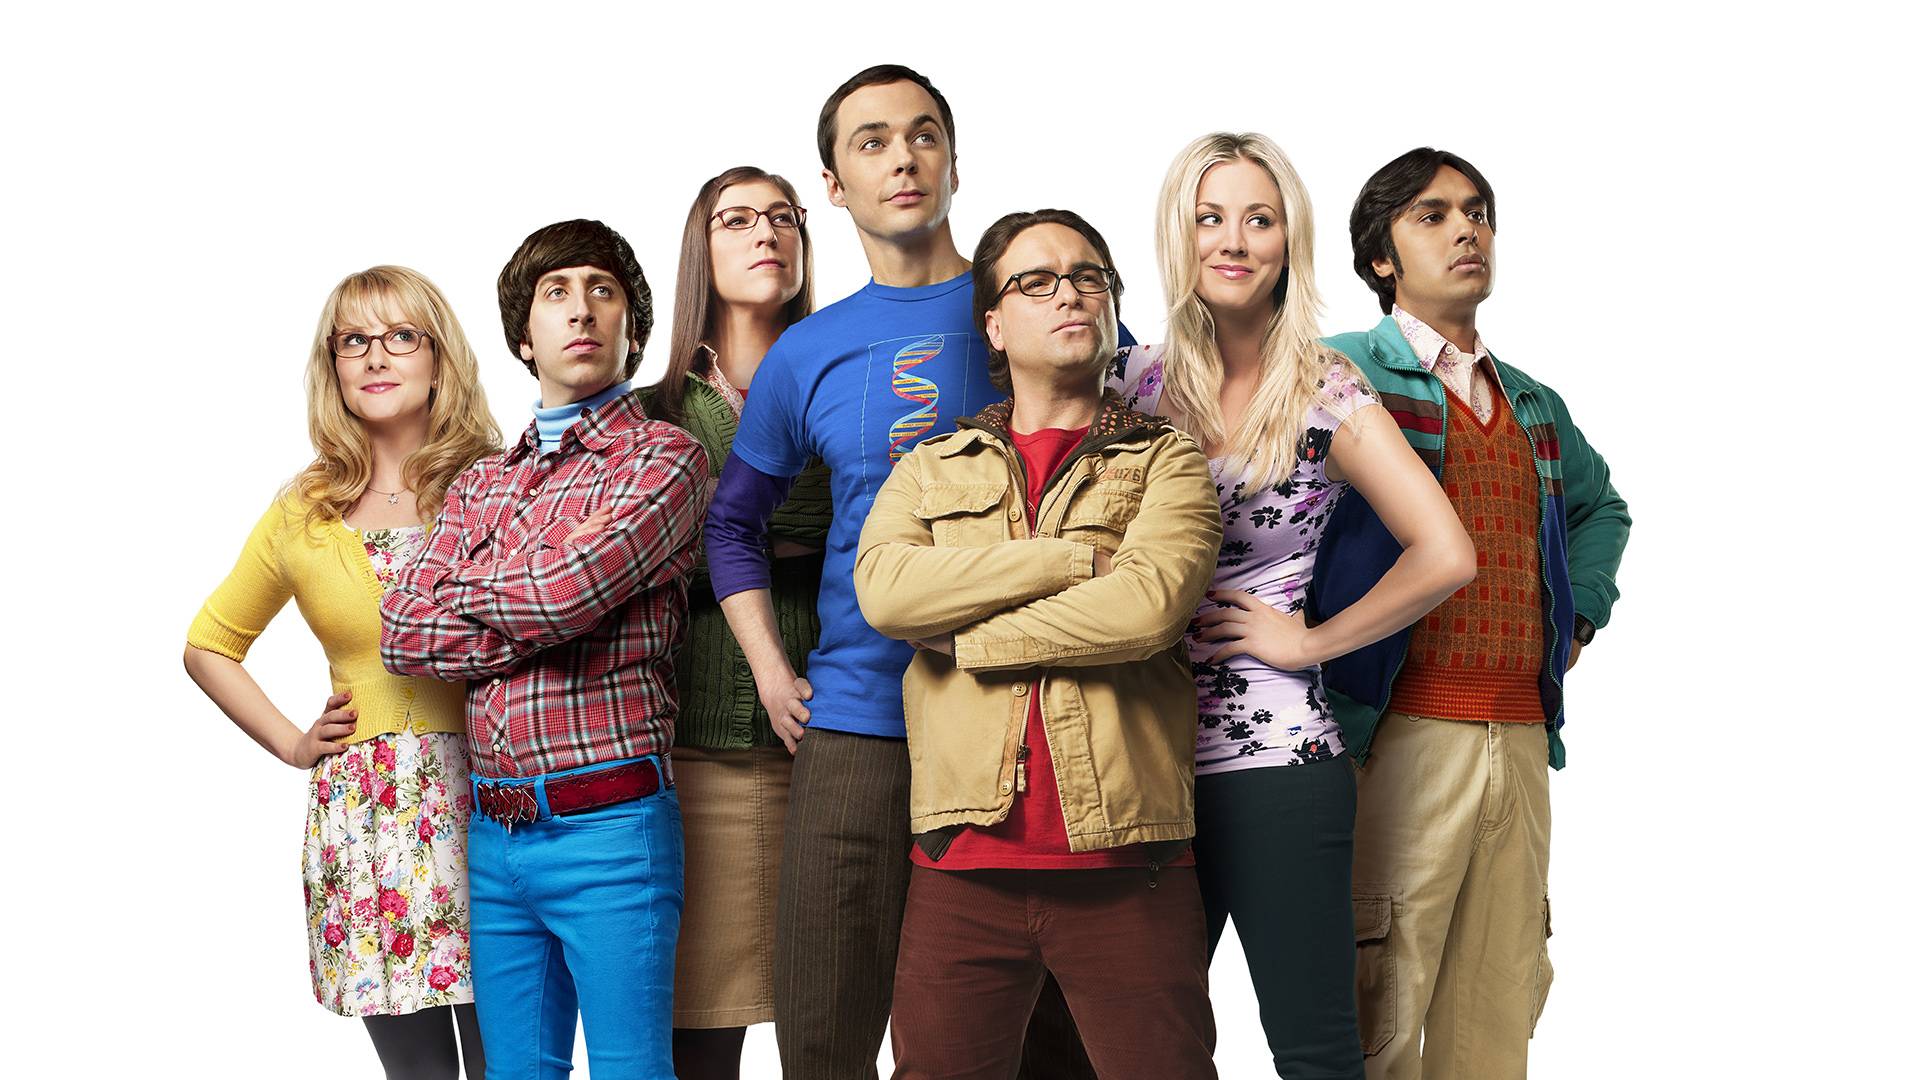 When Does The Big Bang Theory Season 11 Start? Release Date